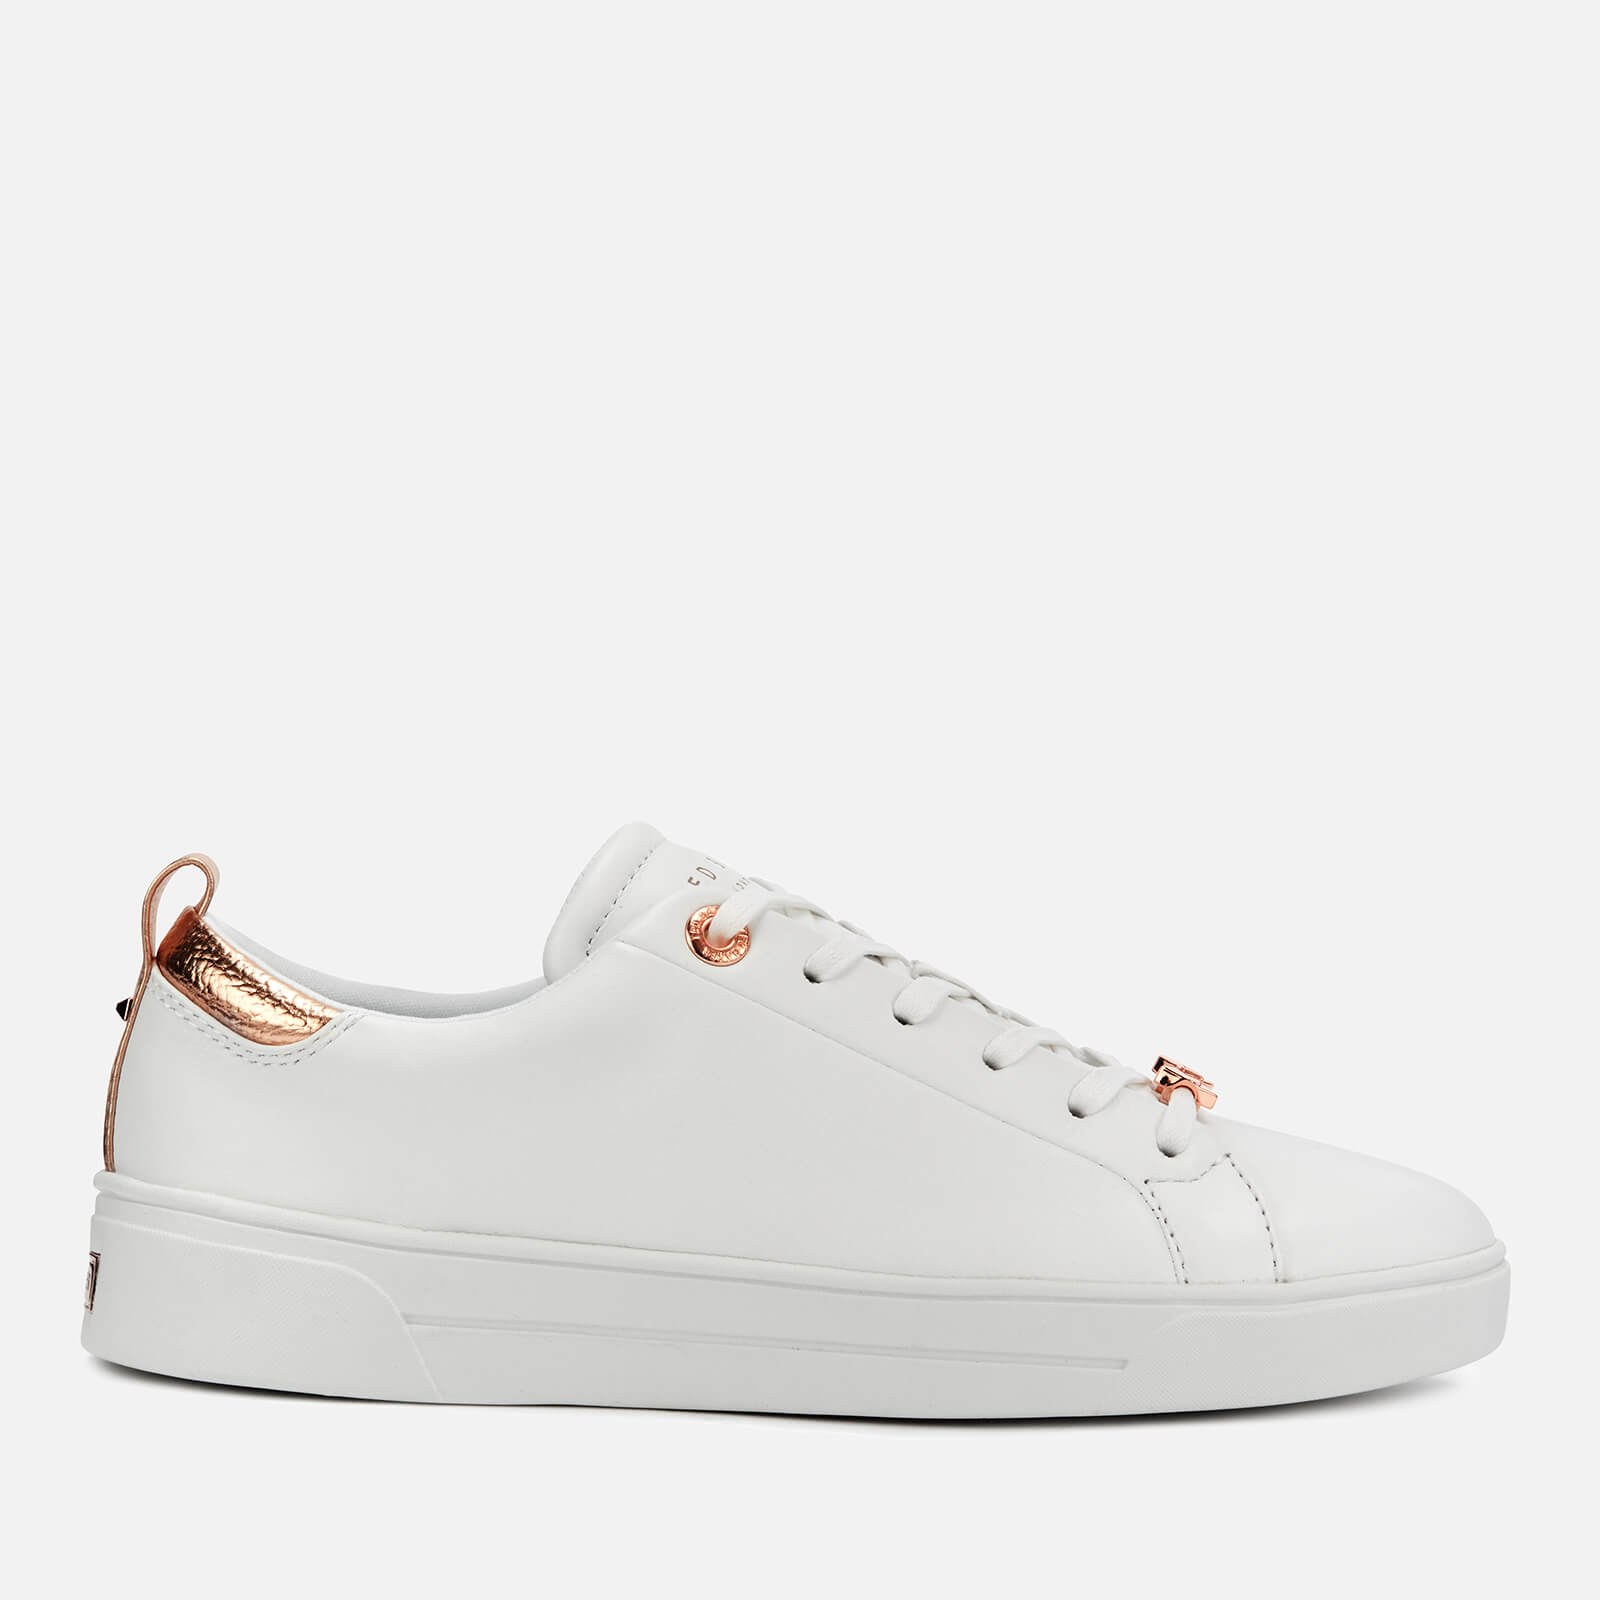 Ted Baker Women's Gielli Leather Low Top Trainers - White/White - UK 8 - White